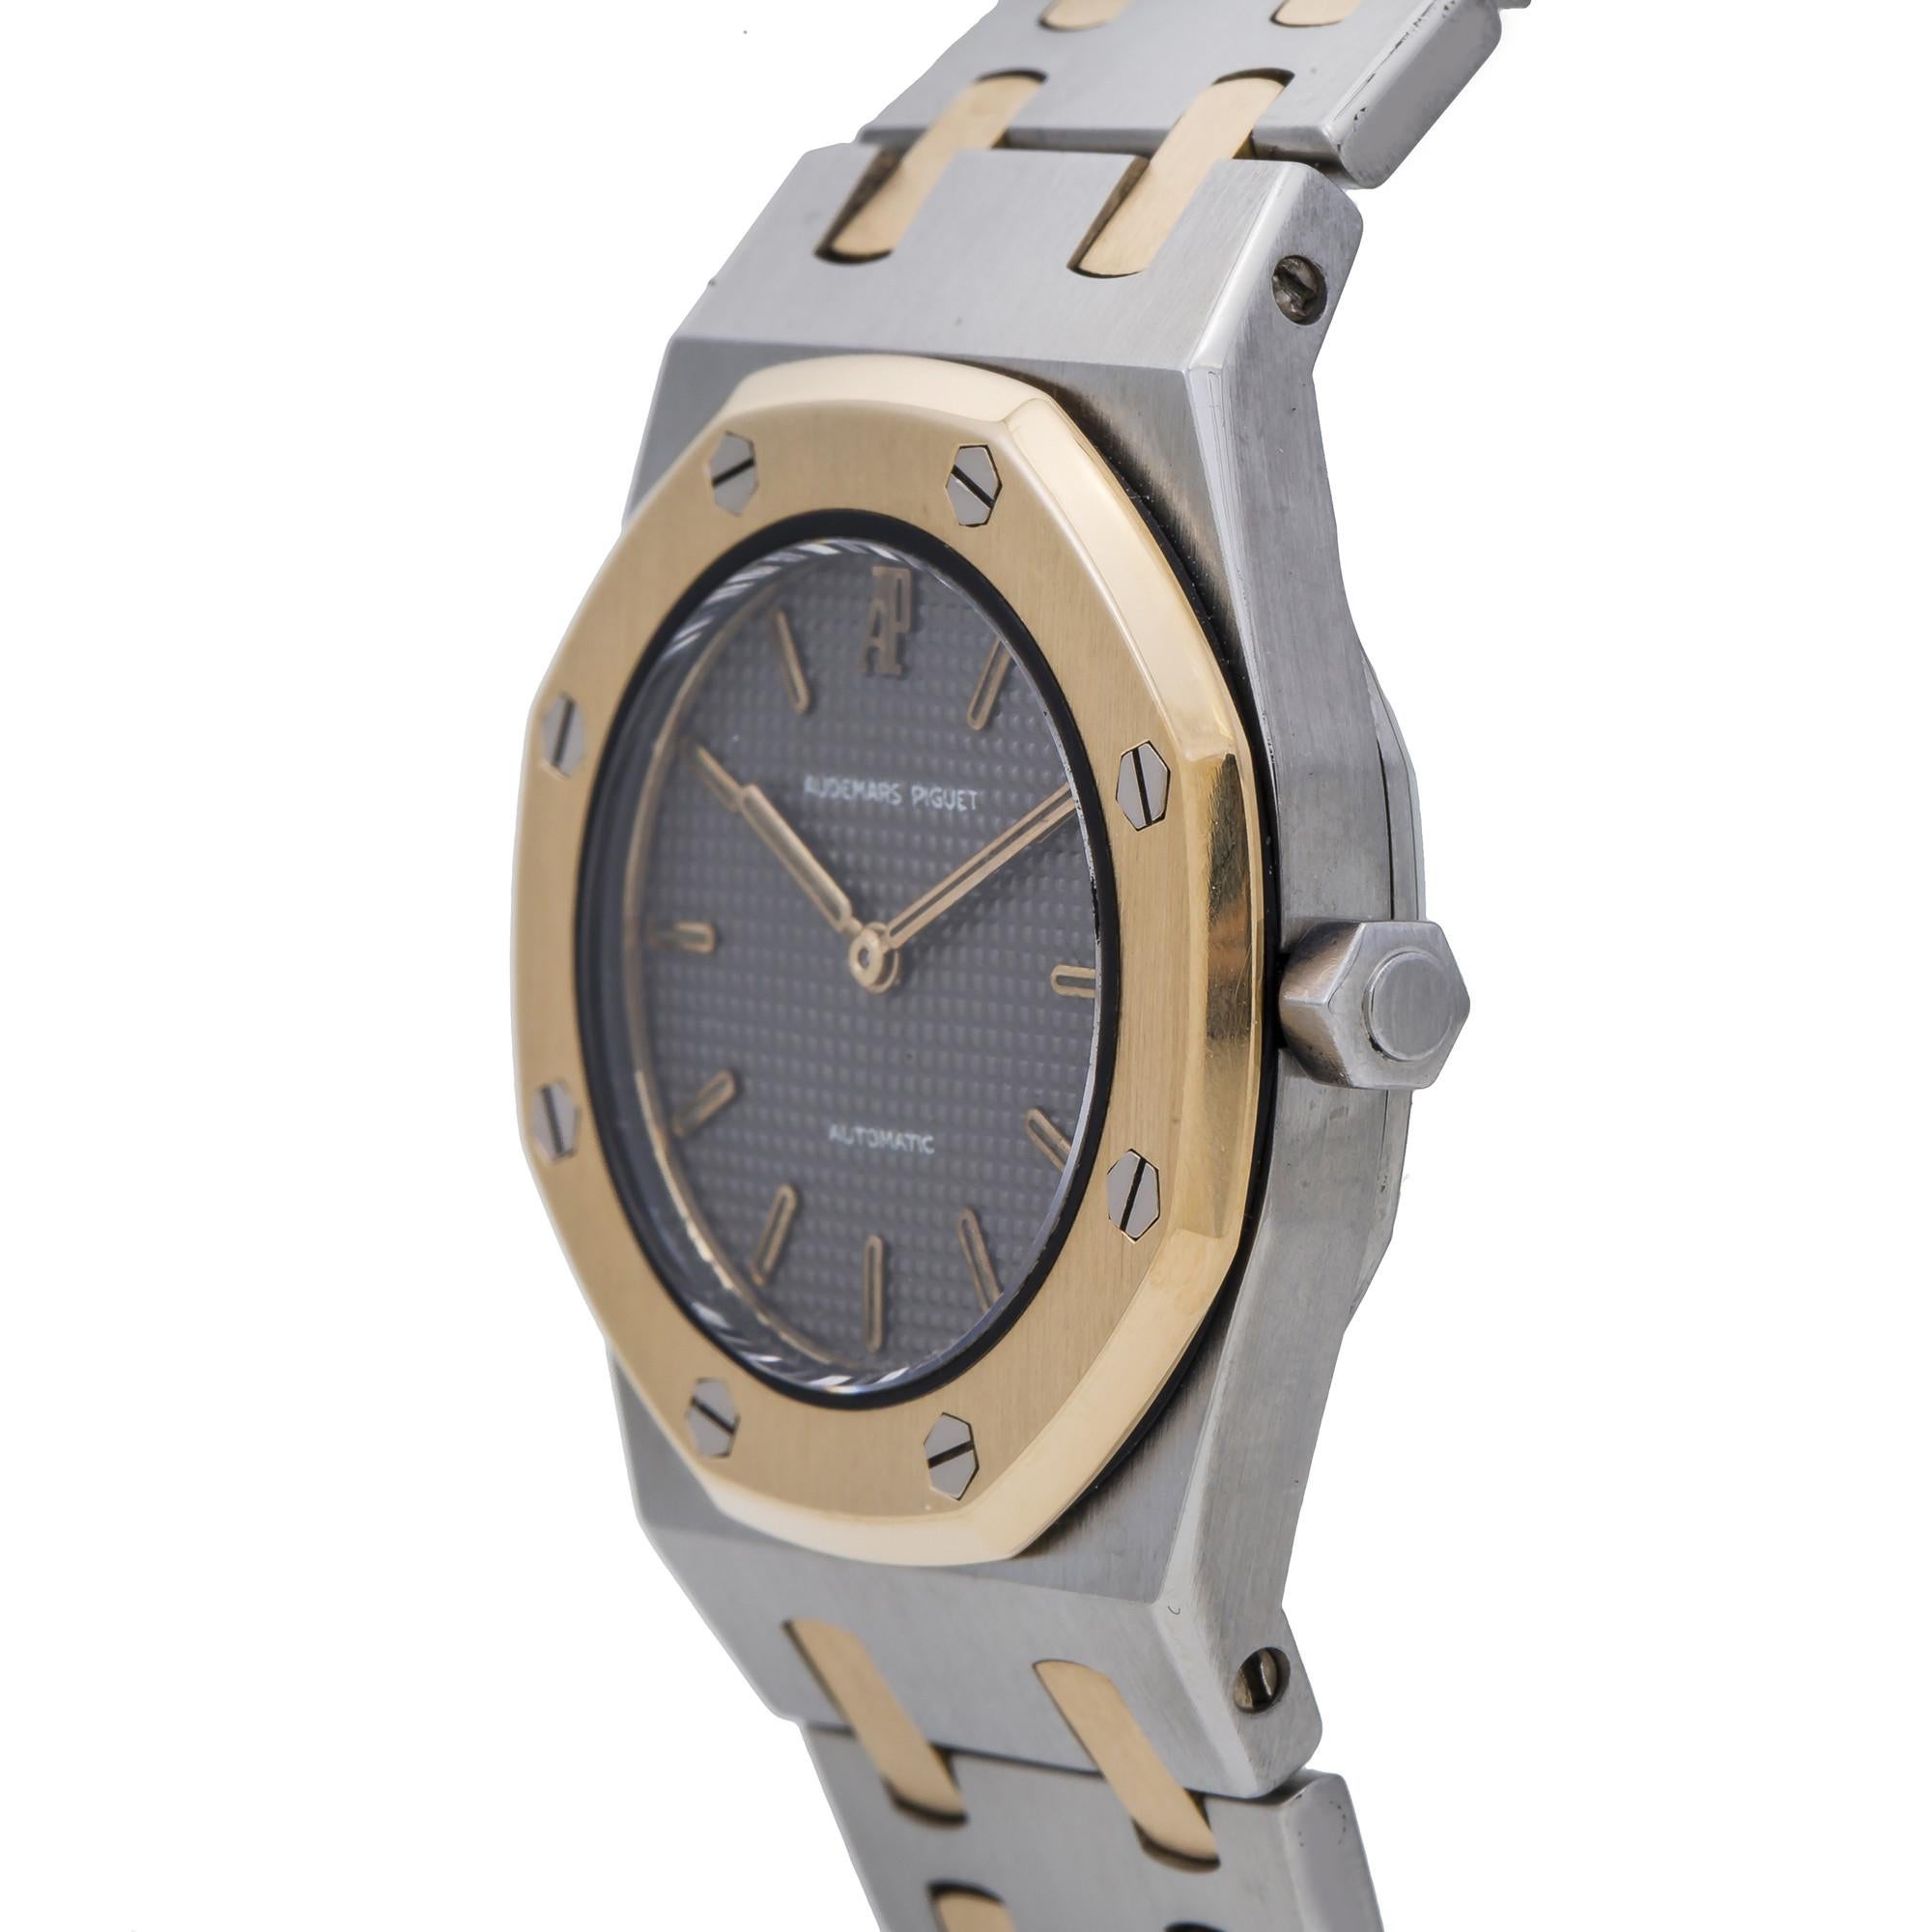 Audemars Piguet Royal Oak No-ref#, Grey Dial, Certified In Excellent Condition For Sale In Miami, FL